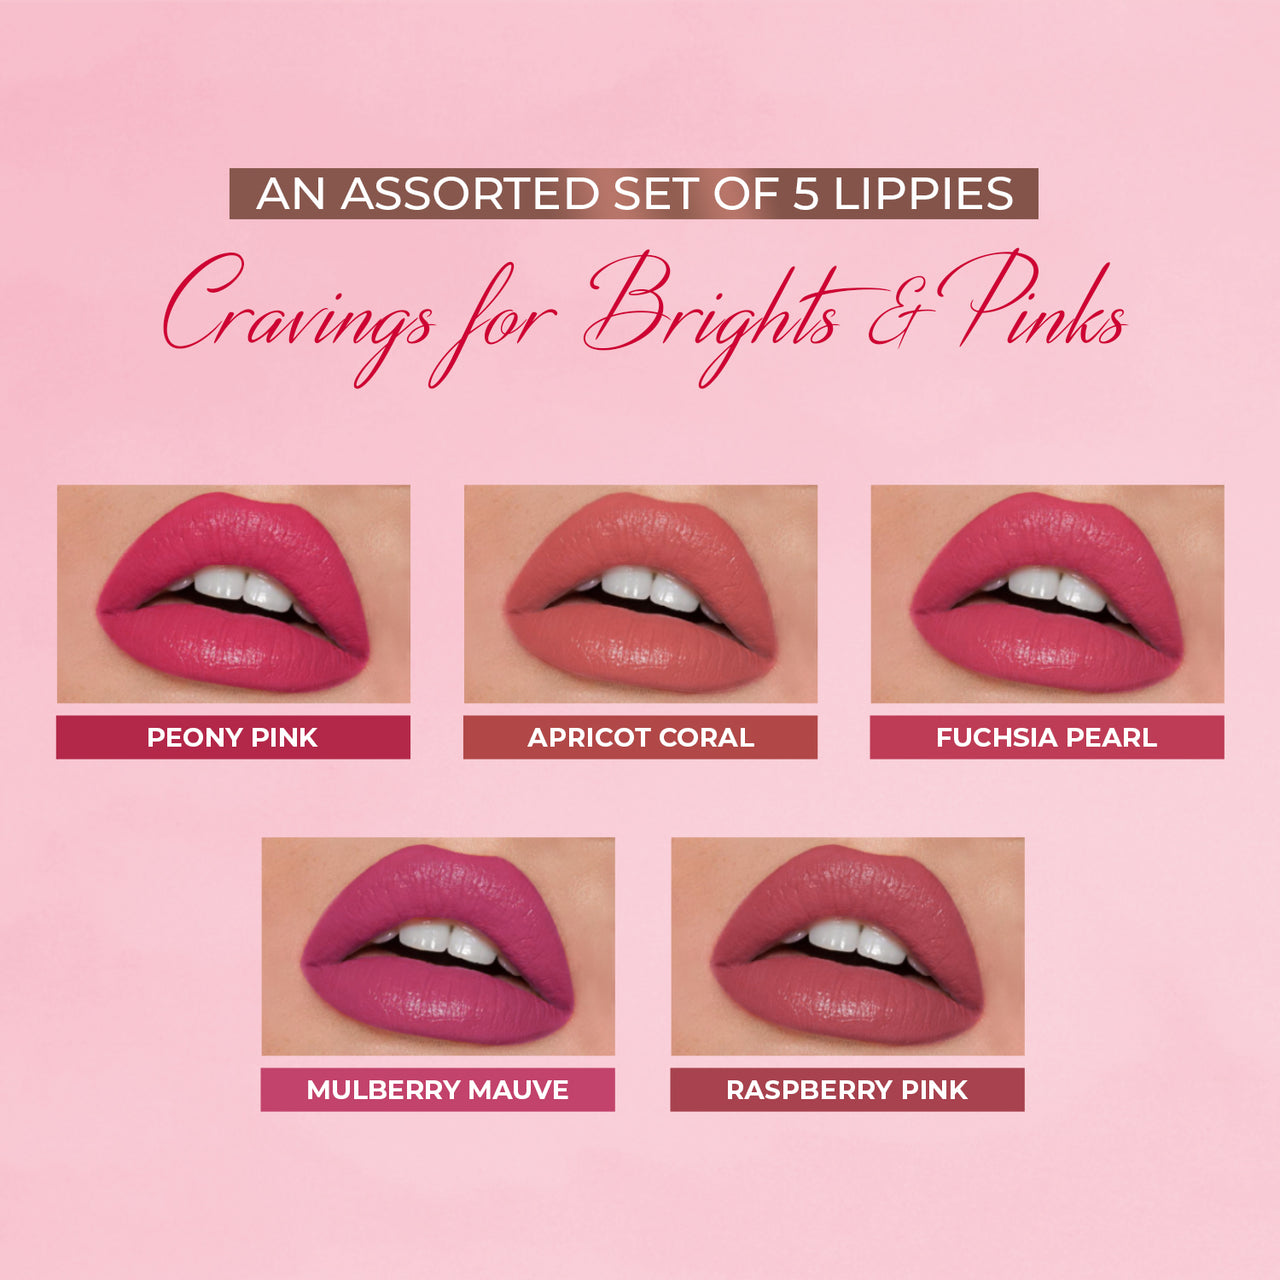 Herb-enriched Matte Liquid Lipstick Combo: Brights & Pinks + Nudes & Browns